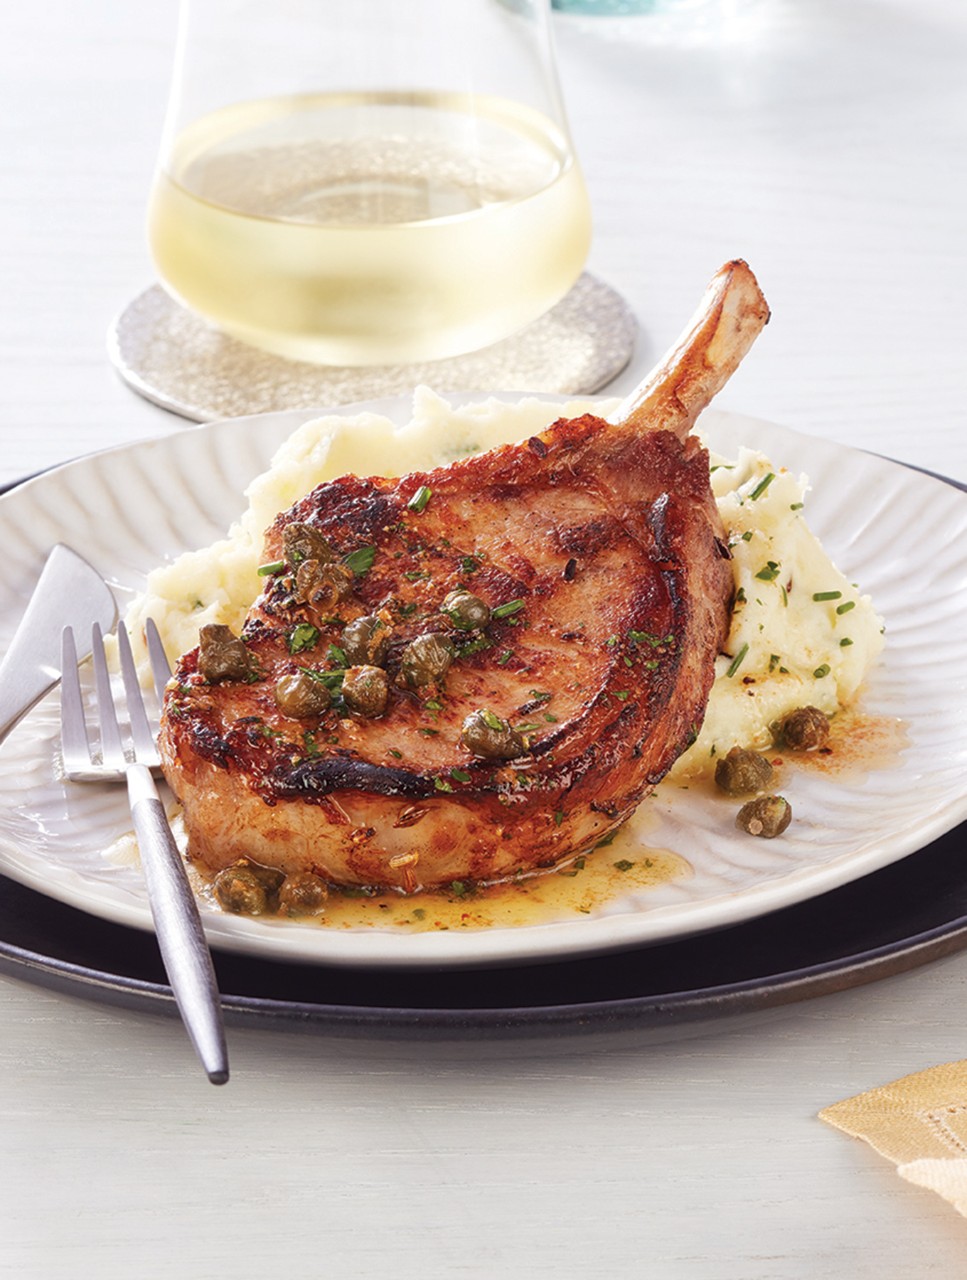 Brined Pork Chops with Fried Capers & Browned Butter